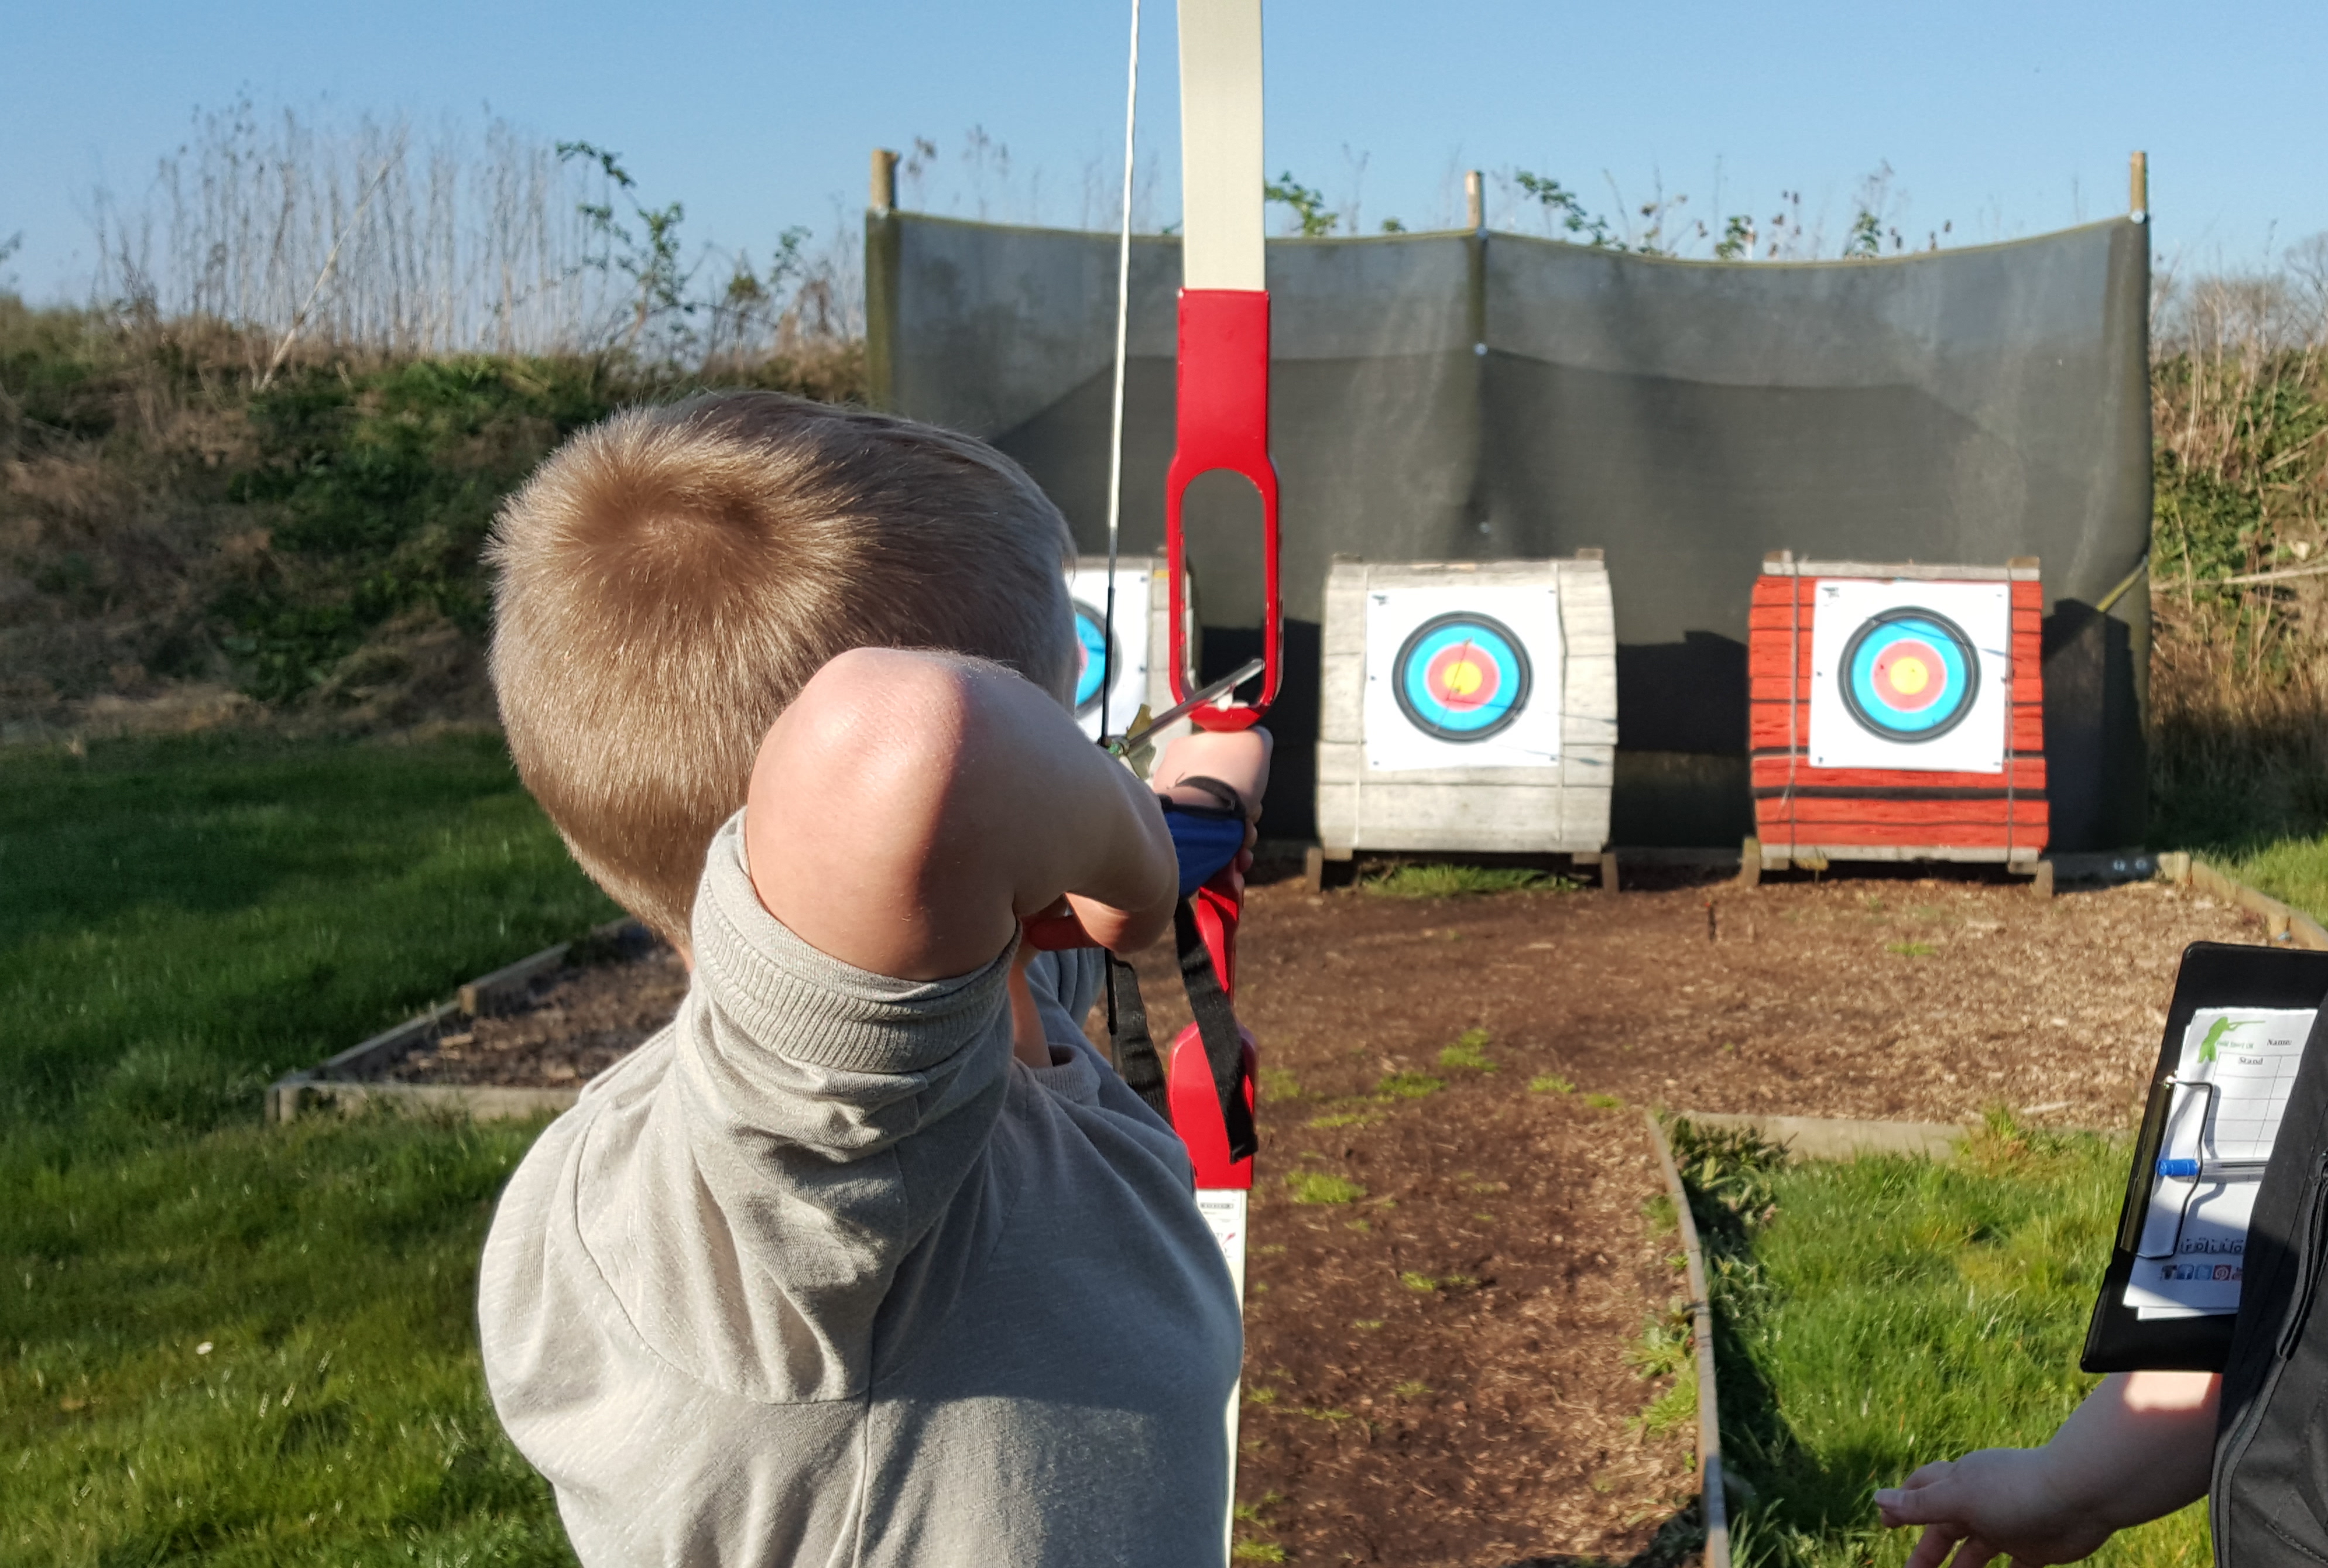 Have a go at Archery, Air Rifle and Pistol Shooting Experience - Field Sport UK